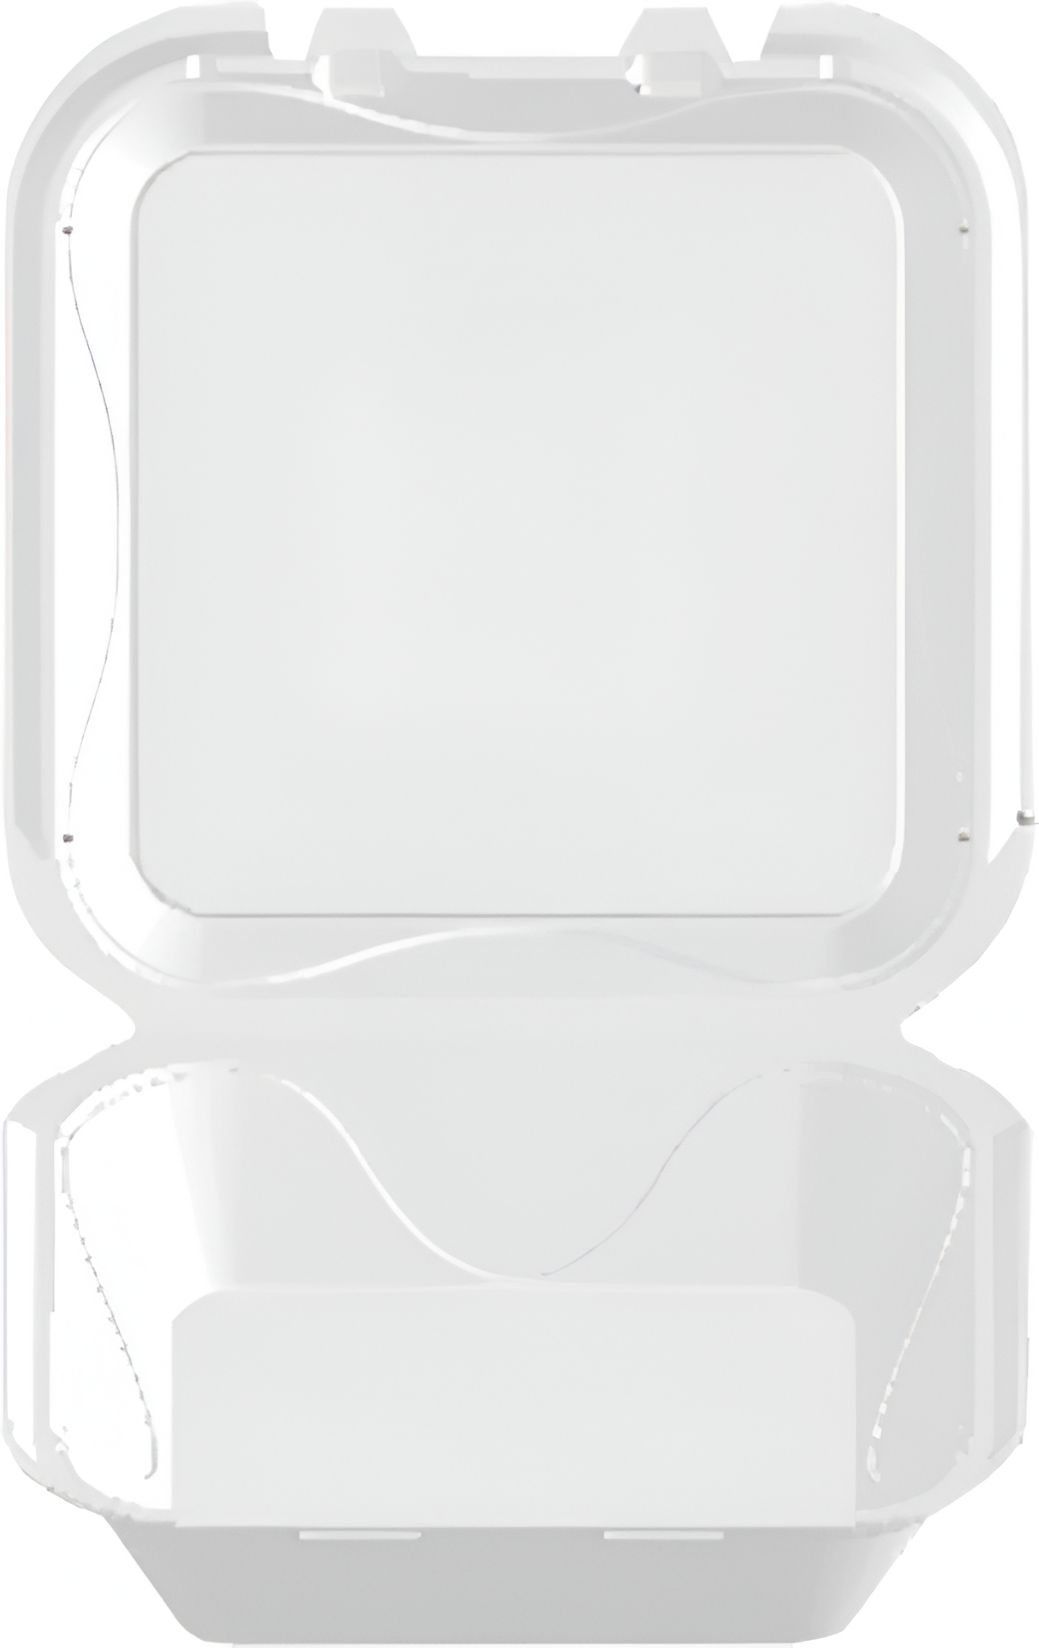 Darnel - 10.25 x 10" x 3.25 White Foam Extra Large Hinged Container, 200/Cs - DU407101